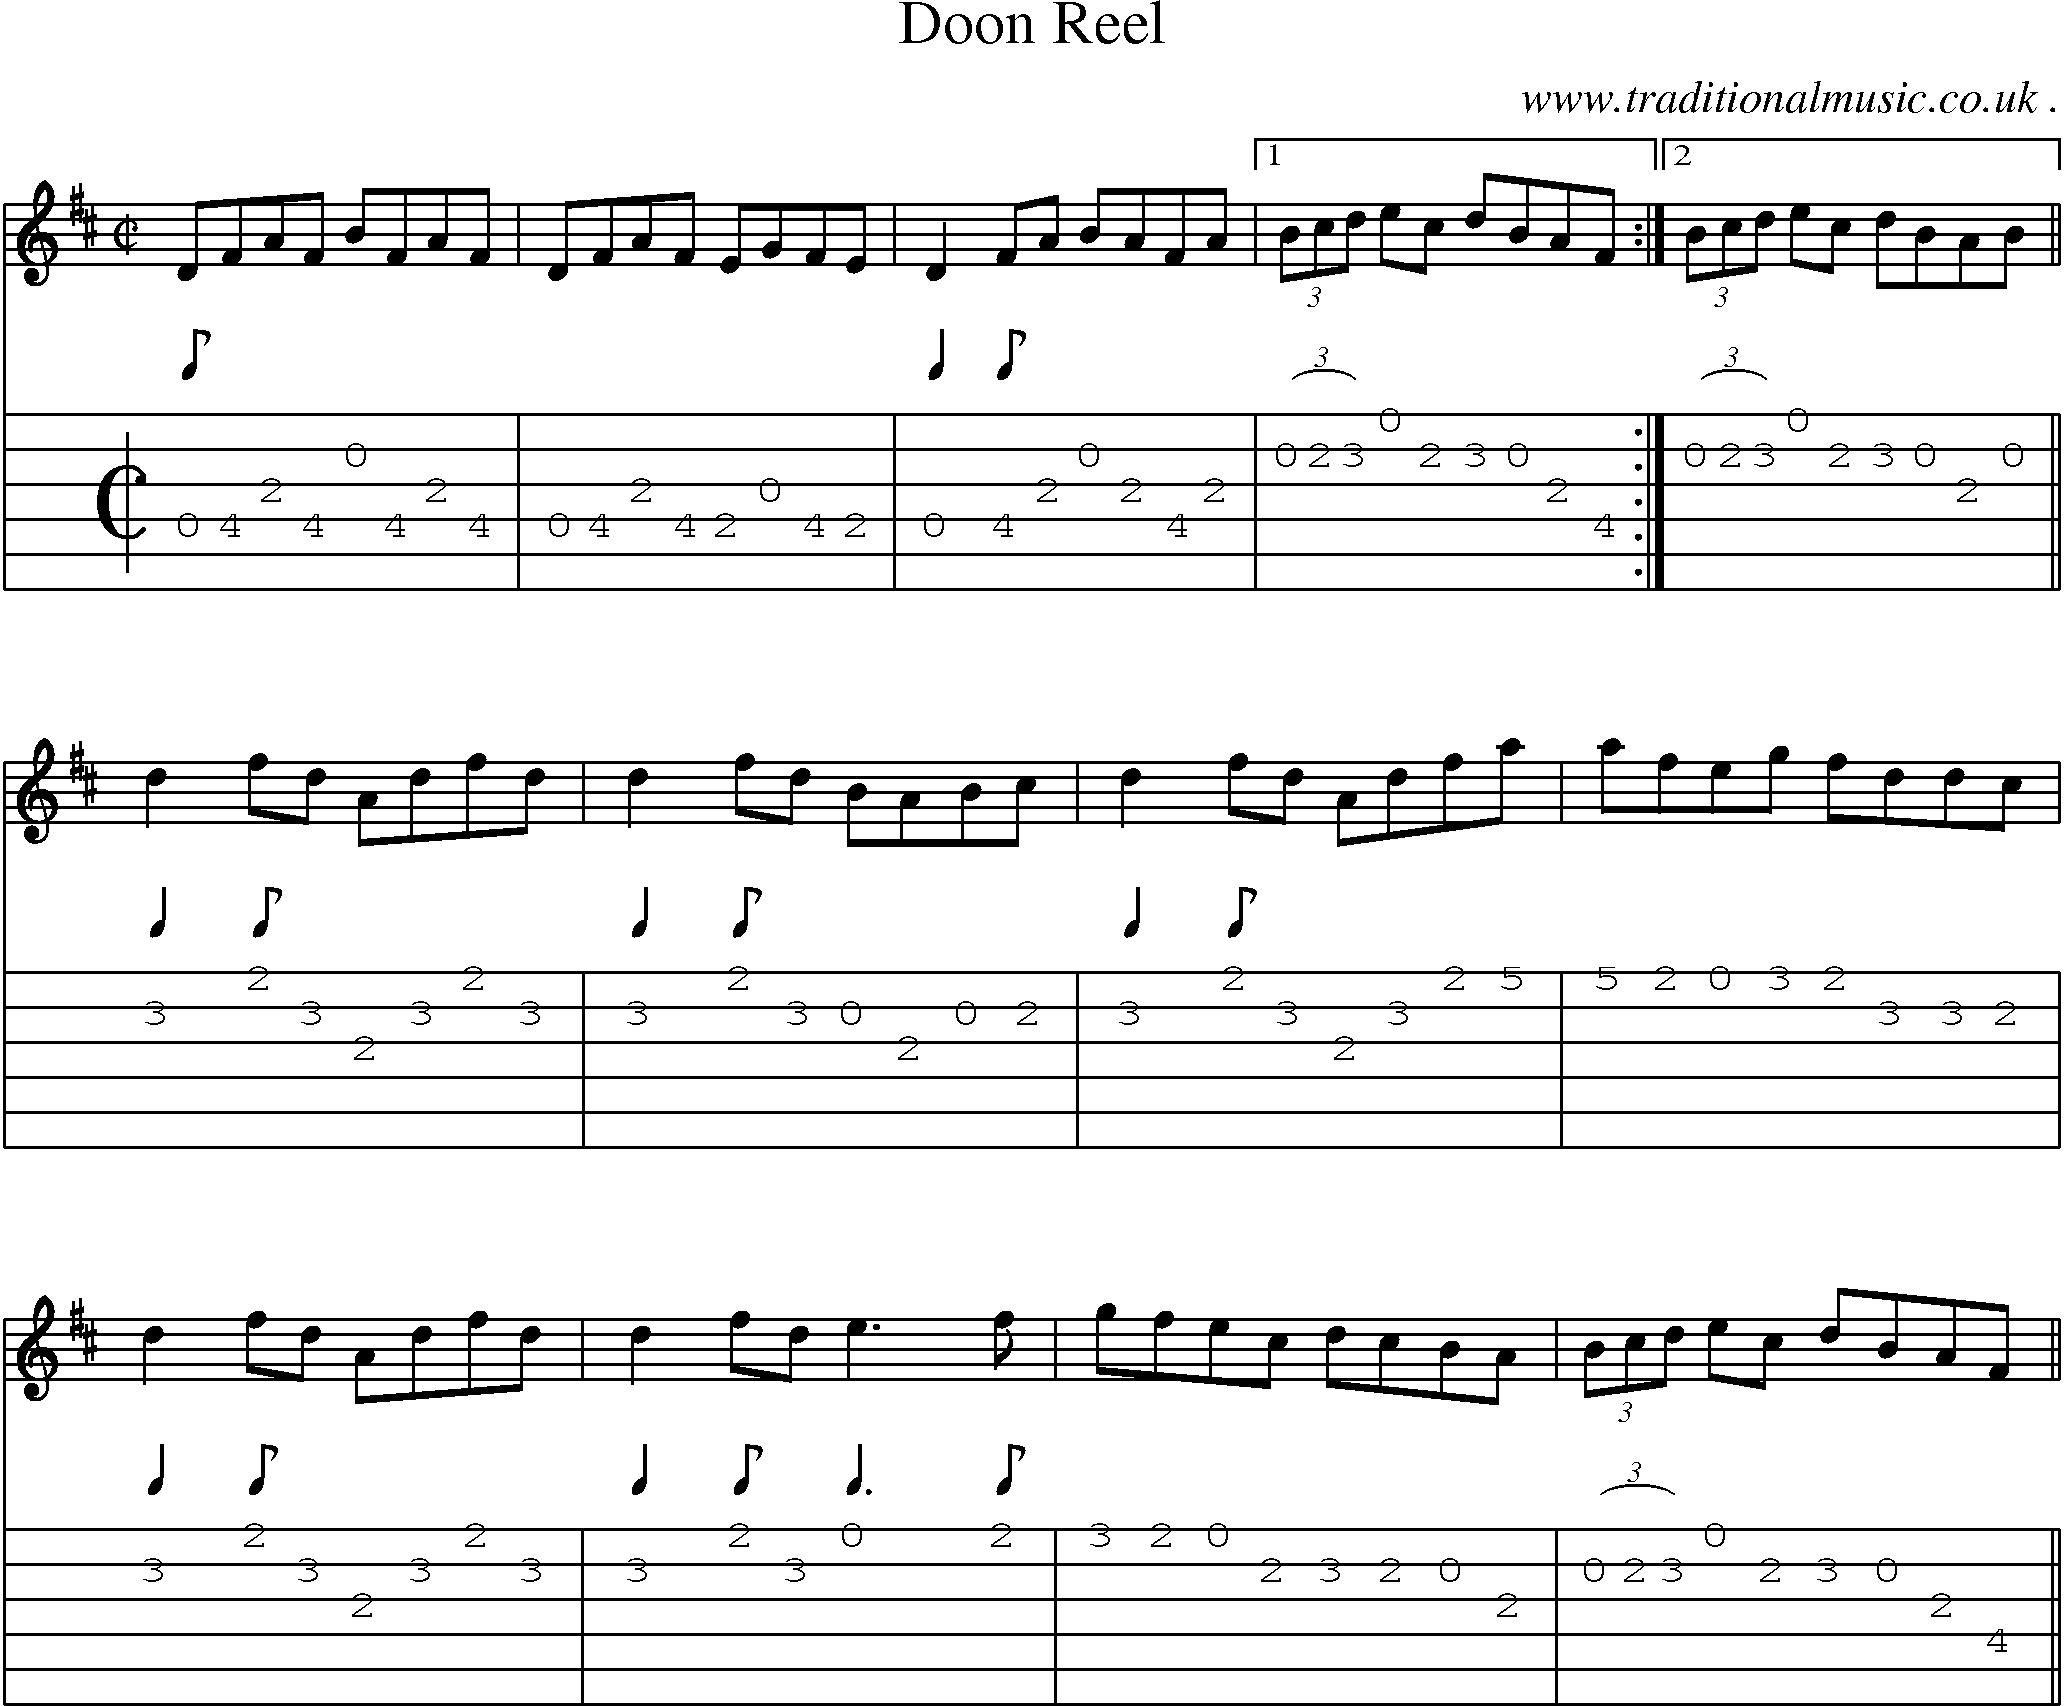 Sheet-Music and Guitar Tabs for Doon Reel